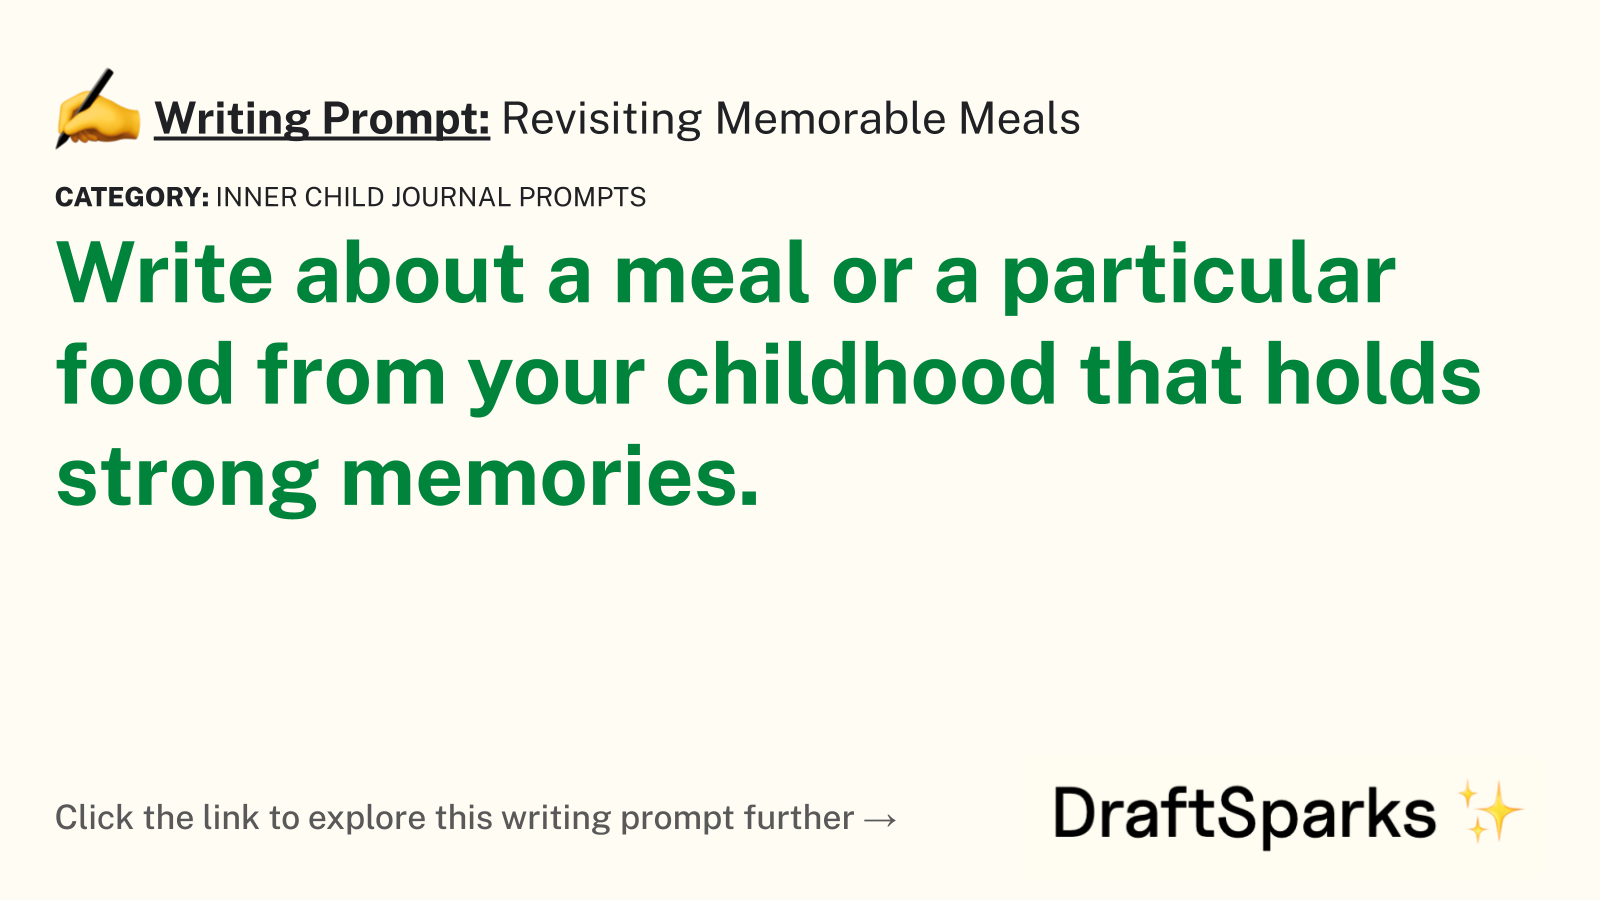 Revisiting Memorable Meals